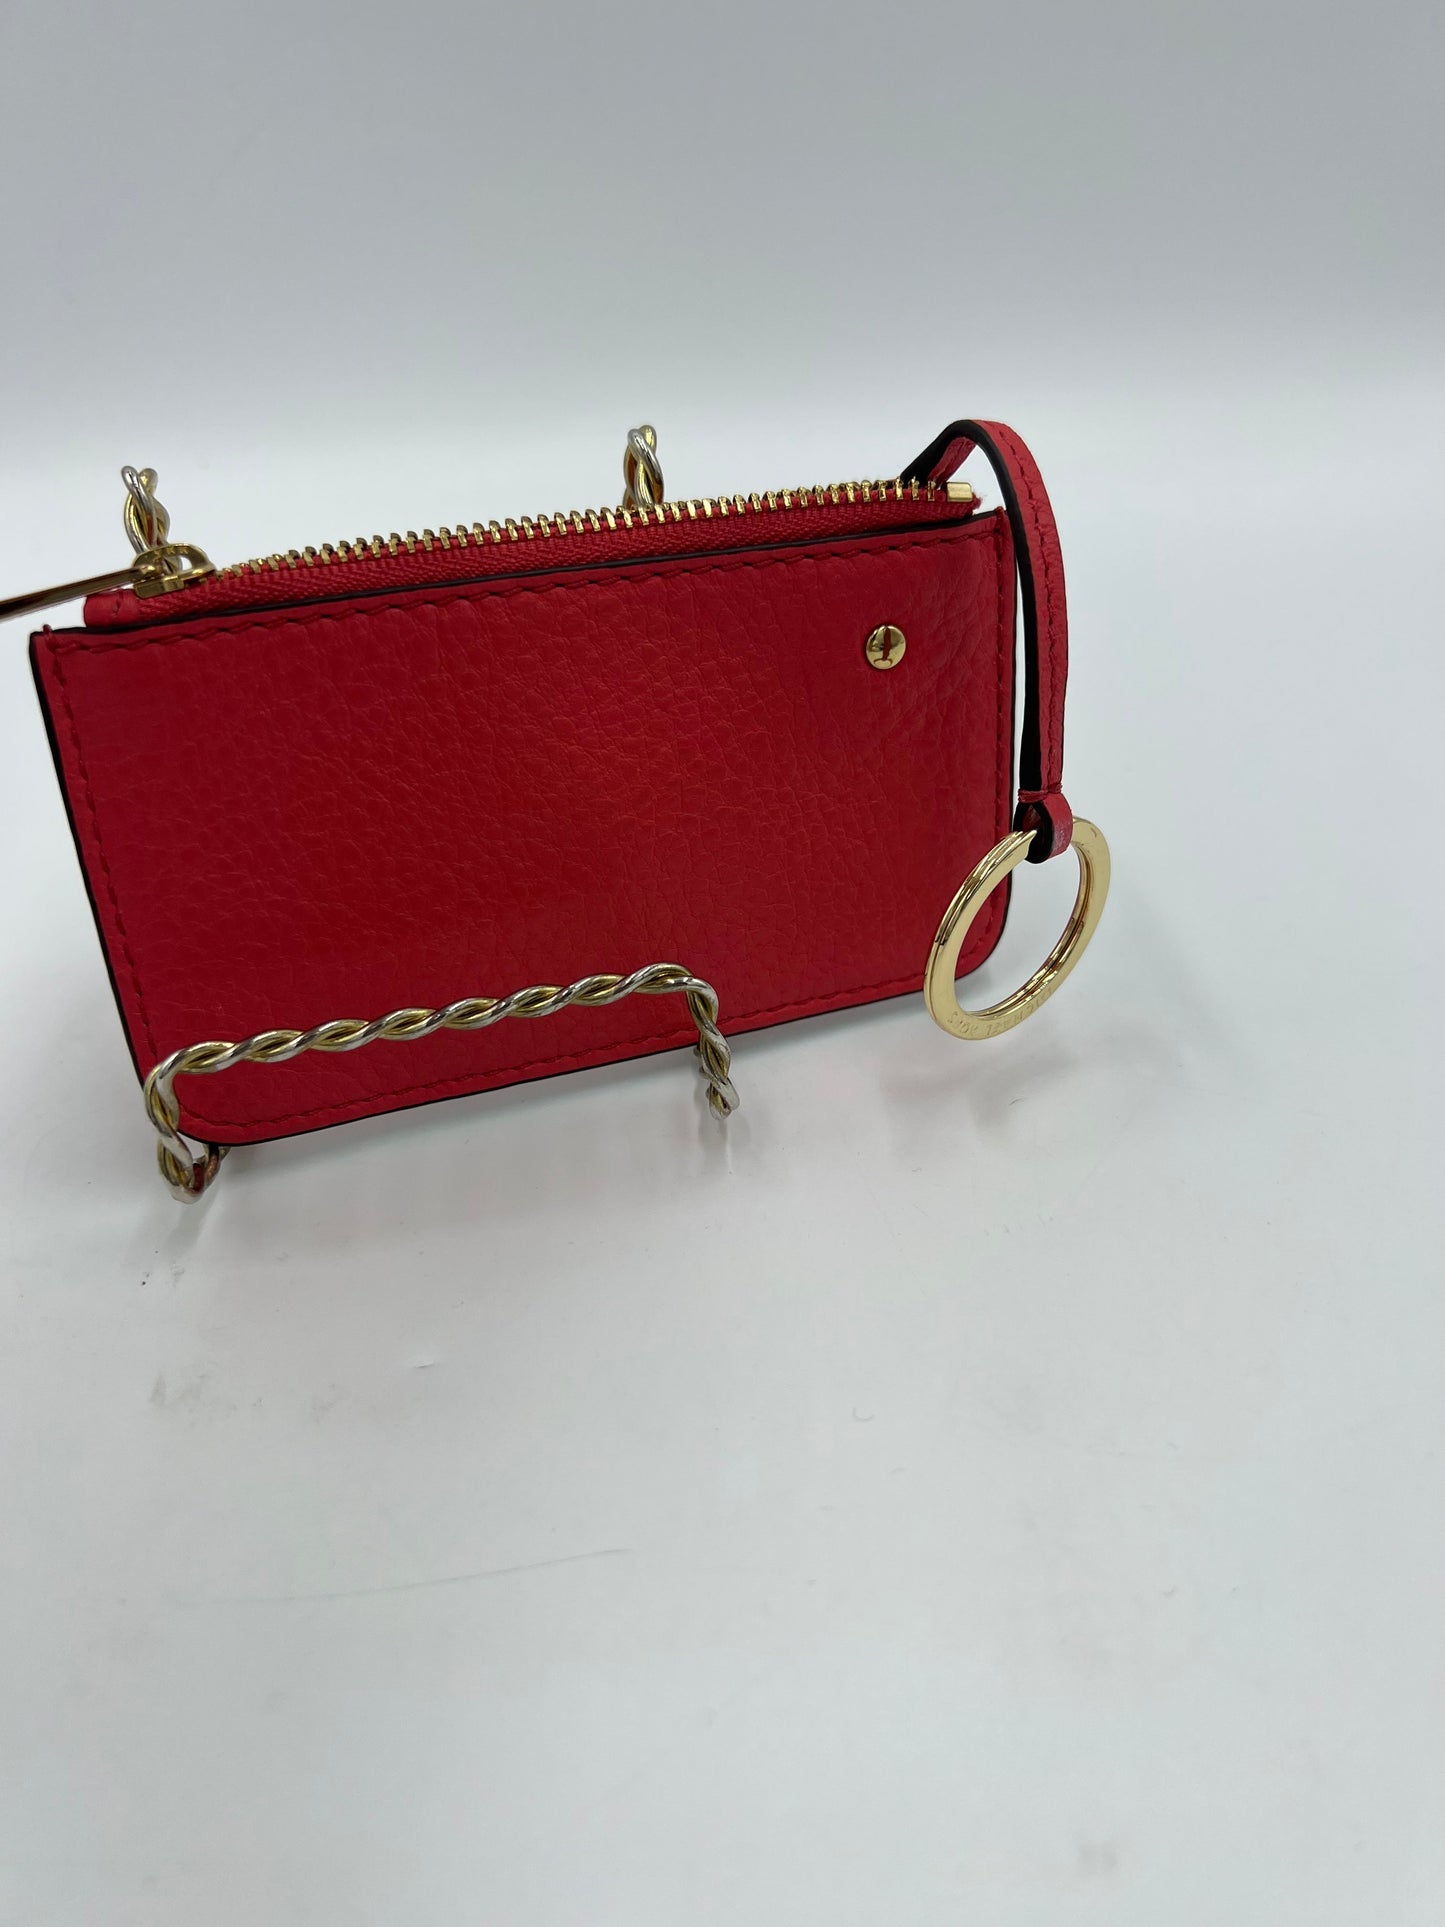 Keychain / Coin Purse Designer by Michael Kors